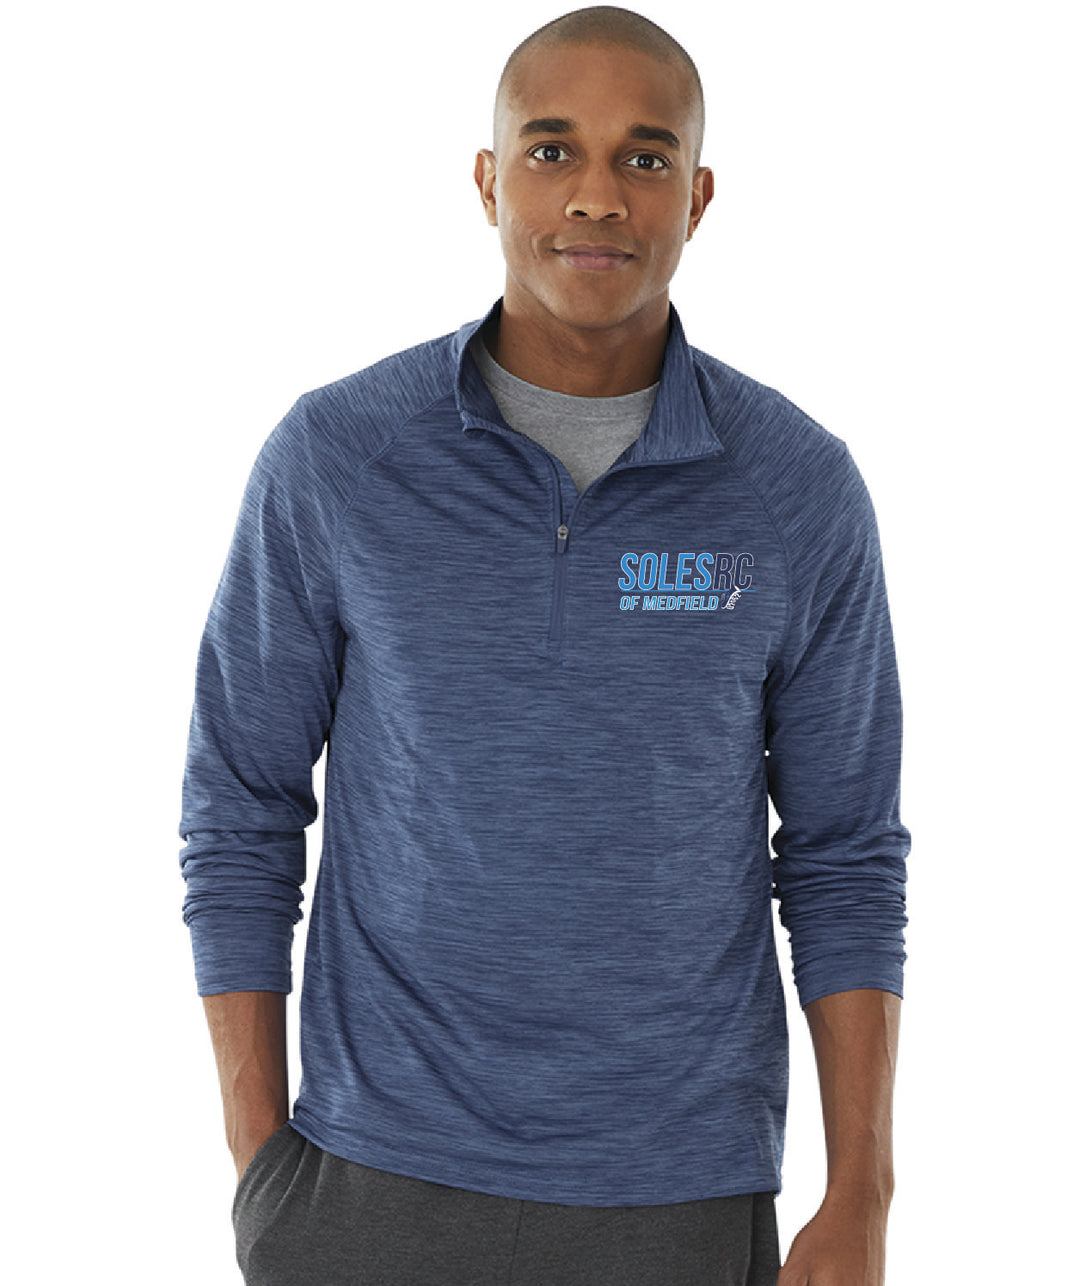 The Soles of Medfield Men's Space Dye Performance Pullover (9763)